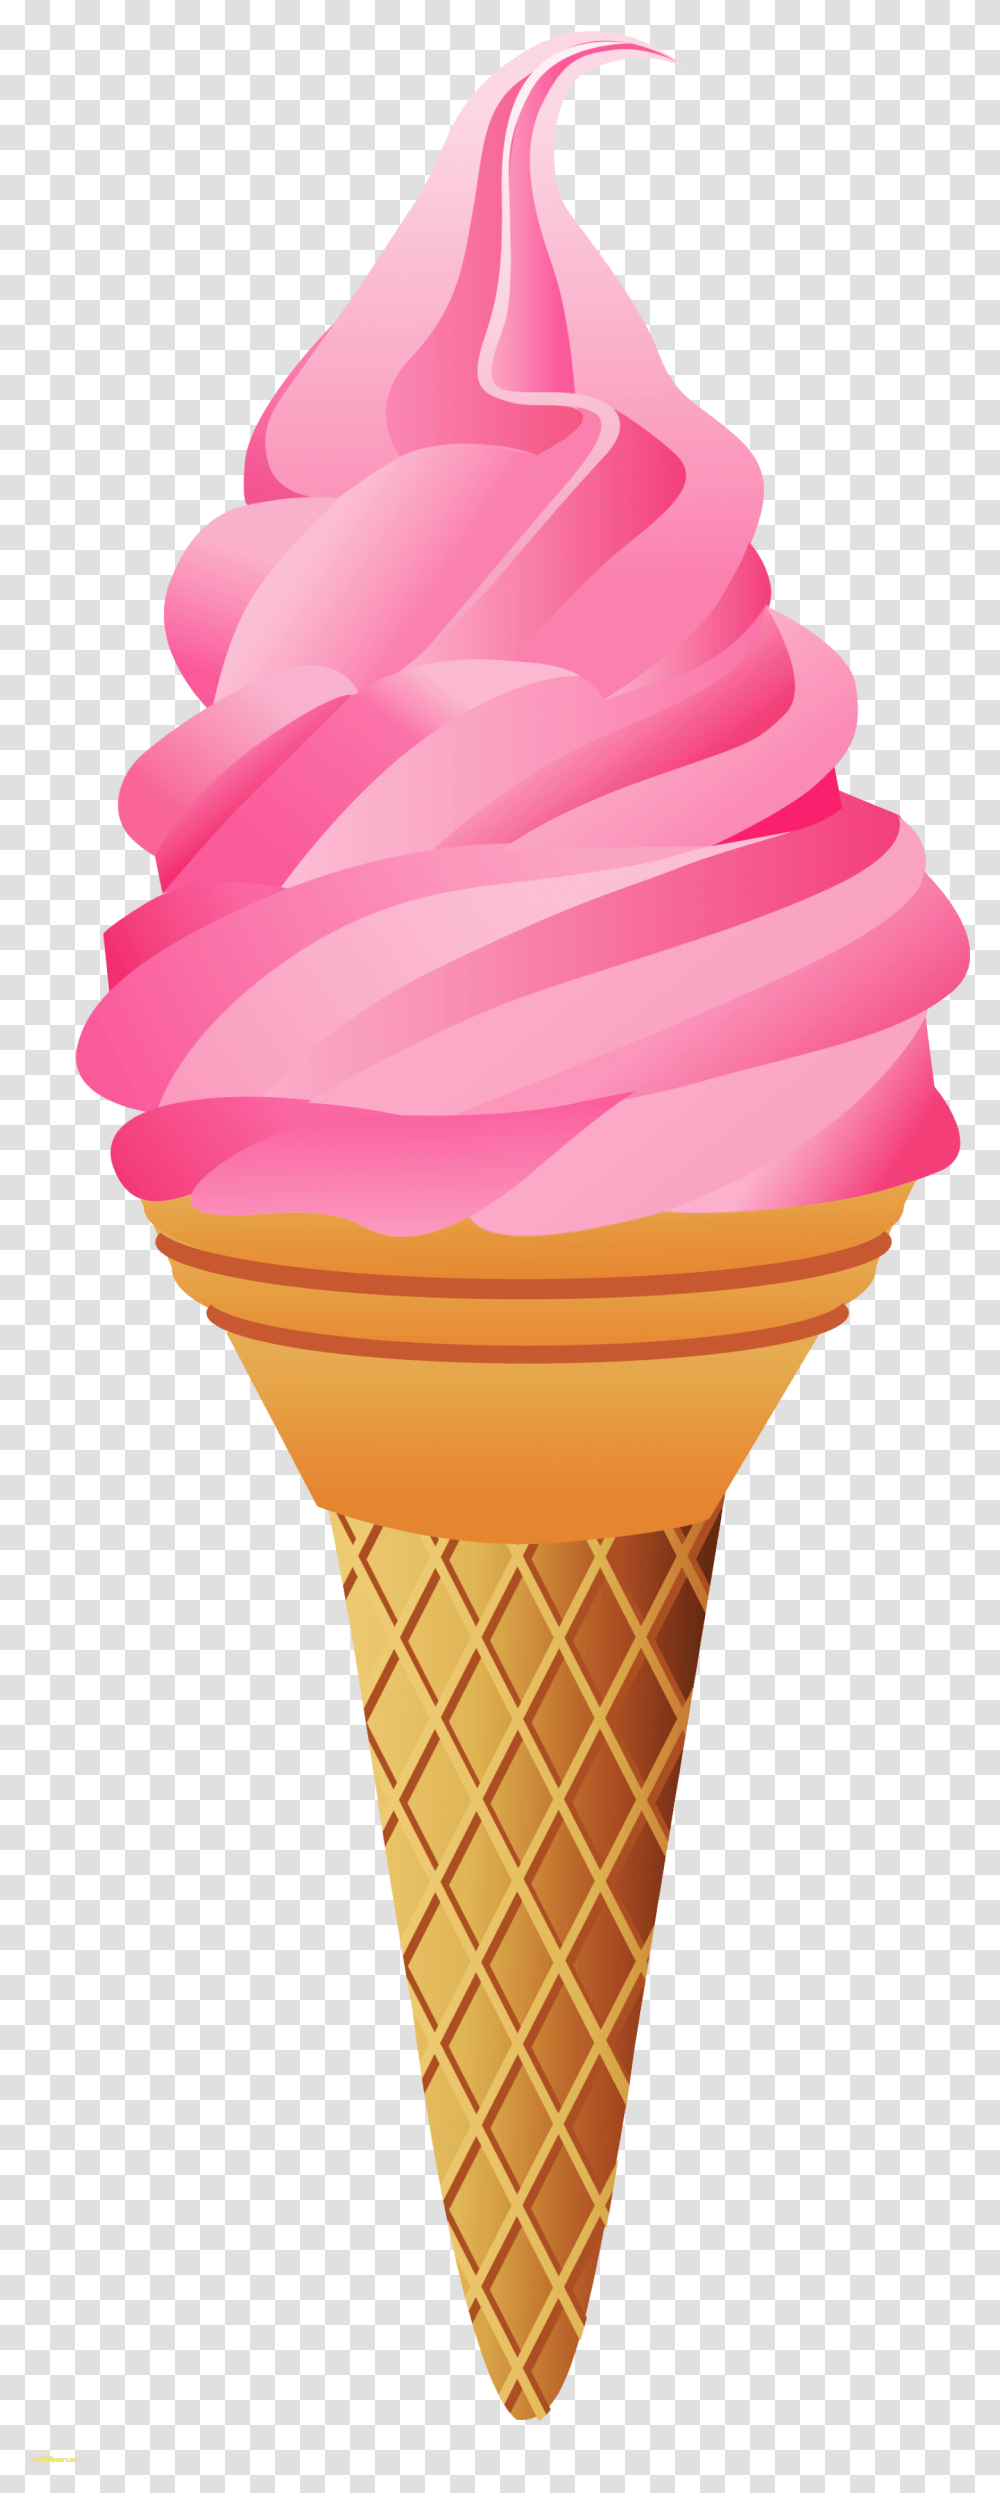 Strawberries Clipart Ice Cream Cone Background Ice Cream, Dessert, Food, Creme, Sweets Transparent Png